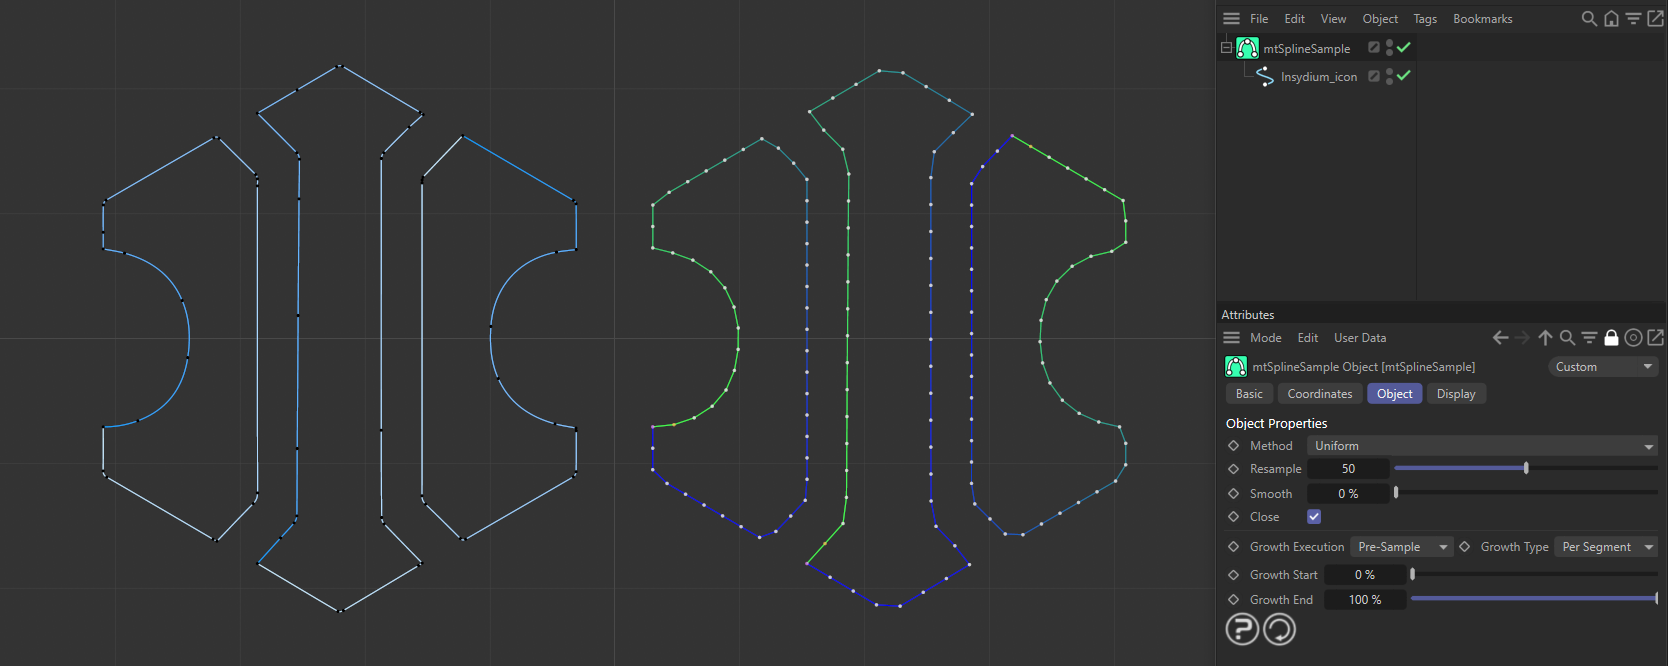 An INSYDIUM logo spline is on the left. On the right, a duplicate spline has been made a child of a mtSplineSample, using the Uniform Method.